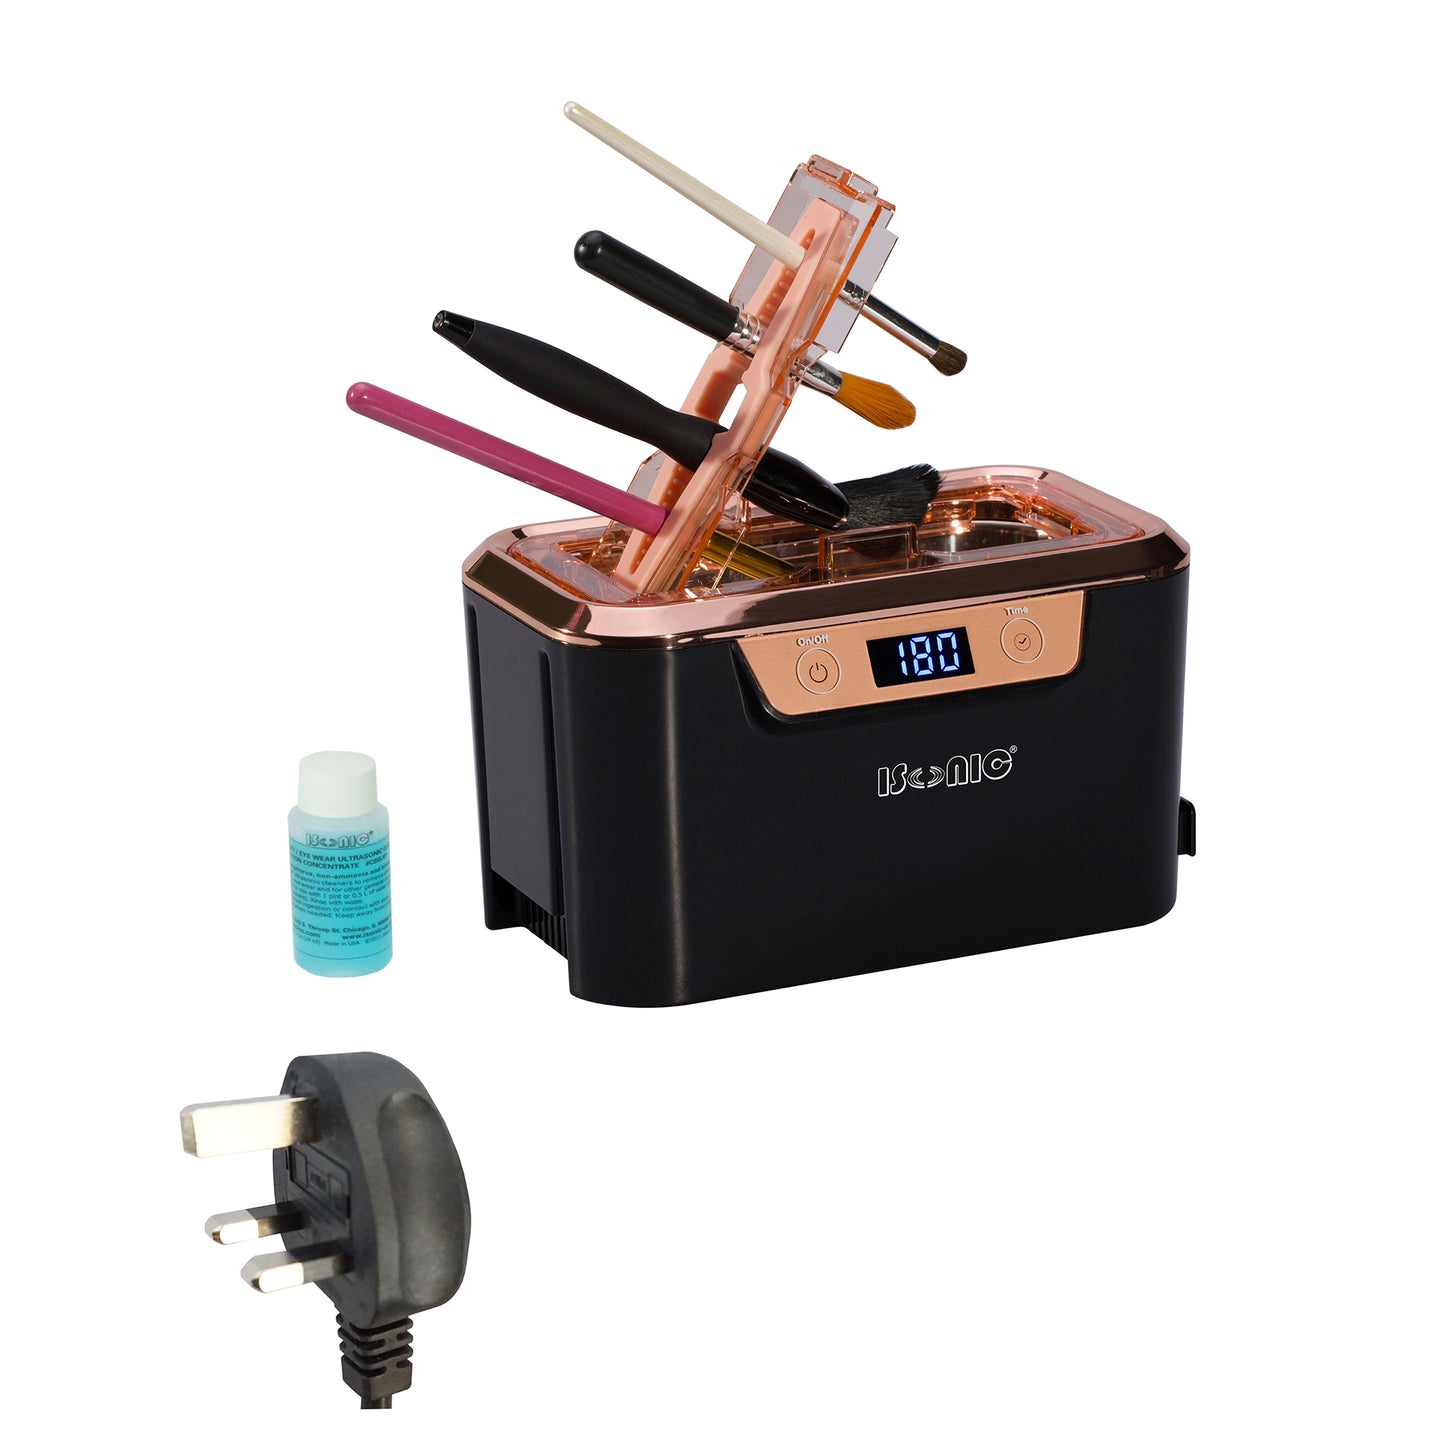 DS310C-BR | iSonic® Miniaturized Commercial Ultrasonic Cleaner with a makeup brush holder, black and rose gold colors